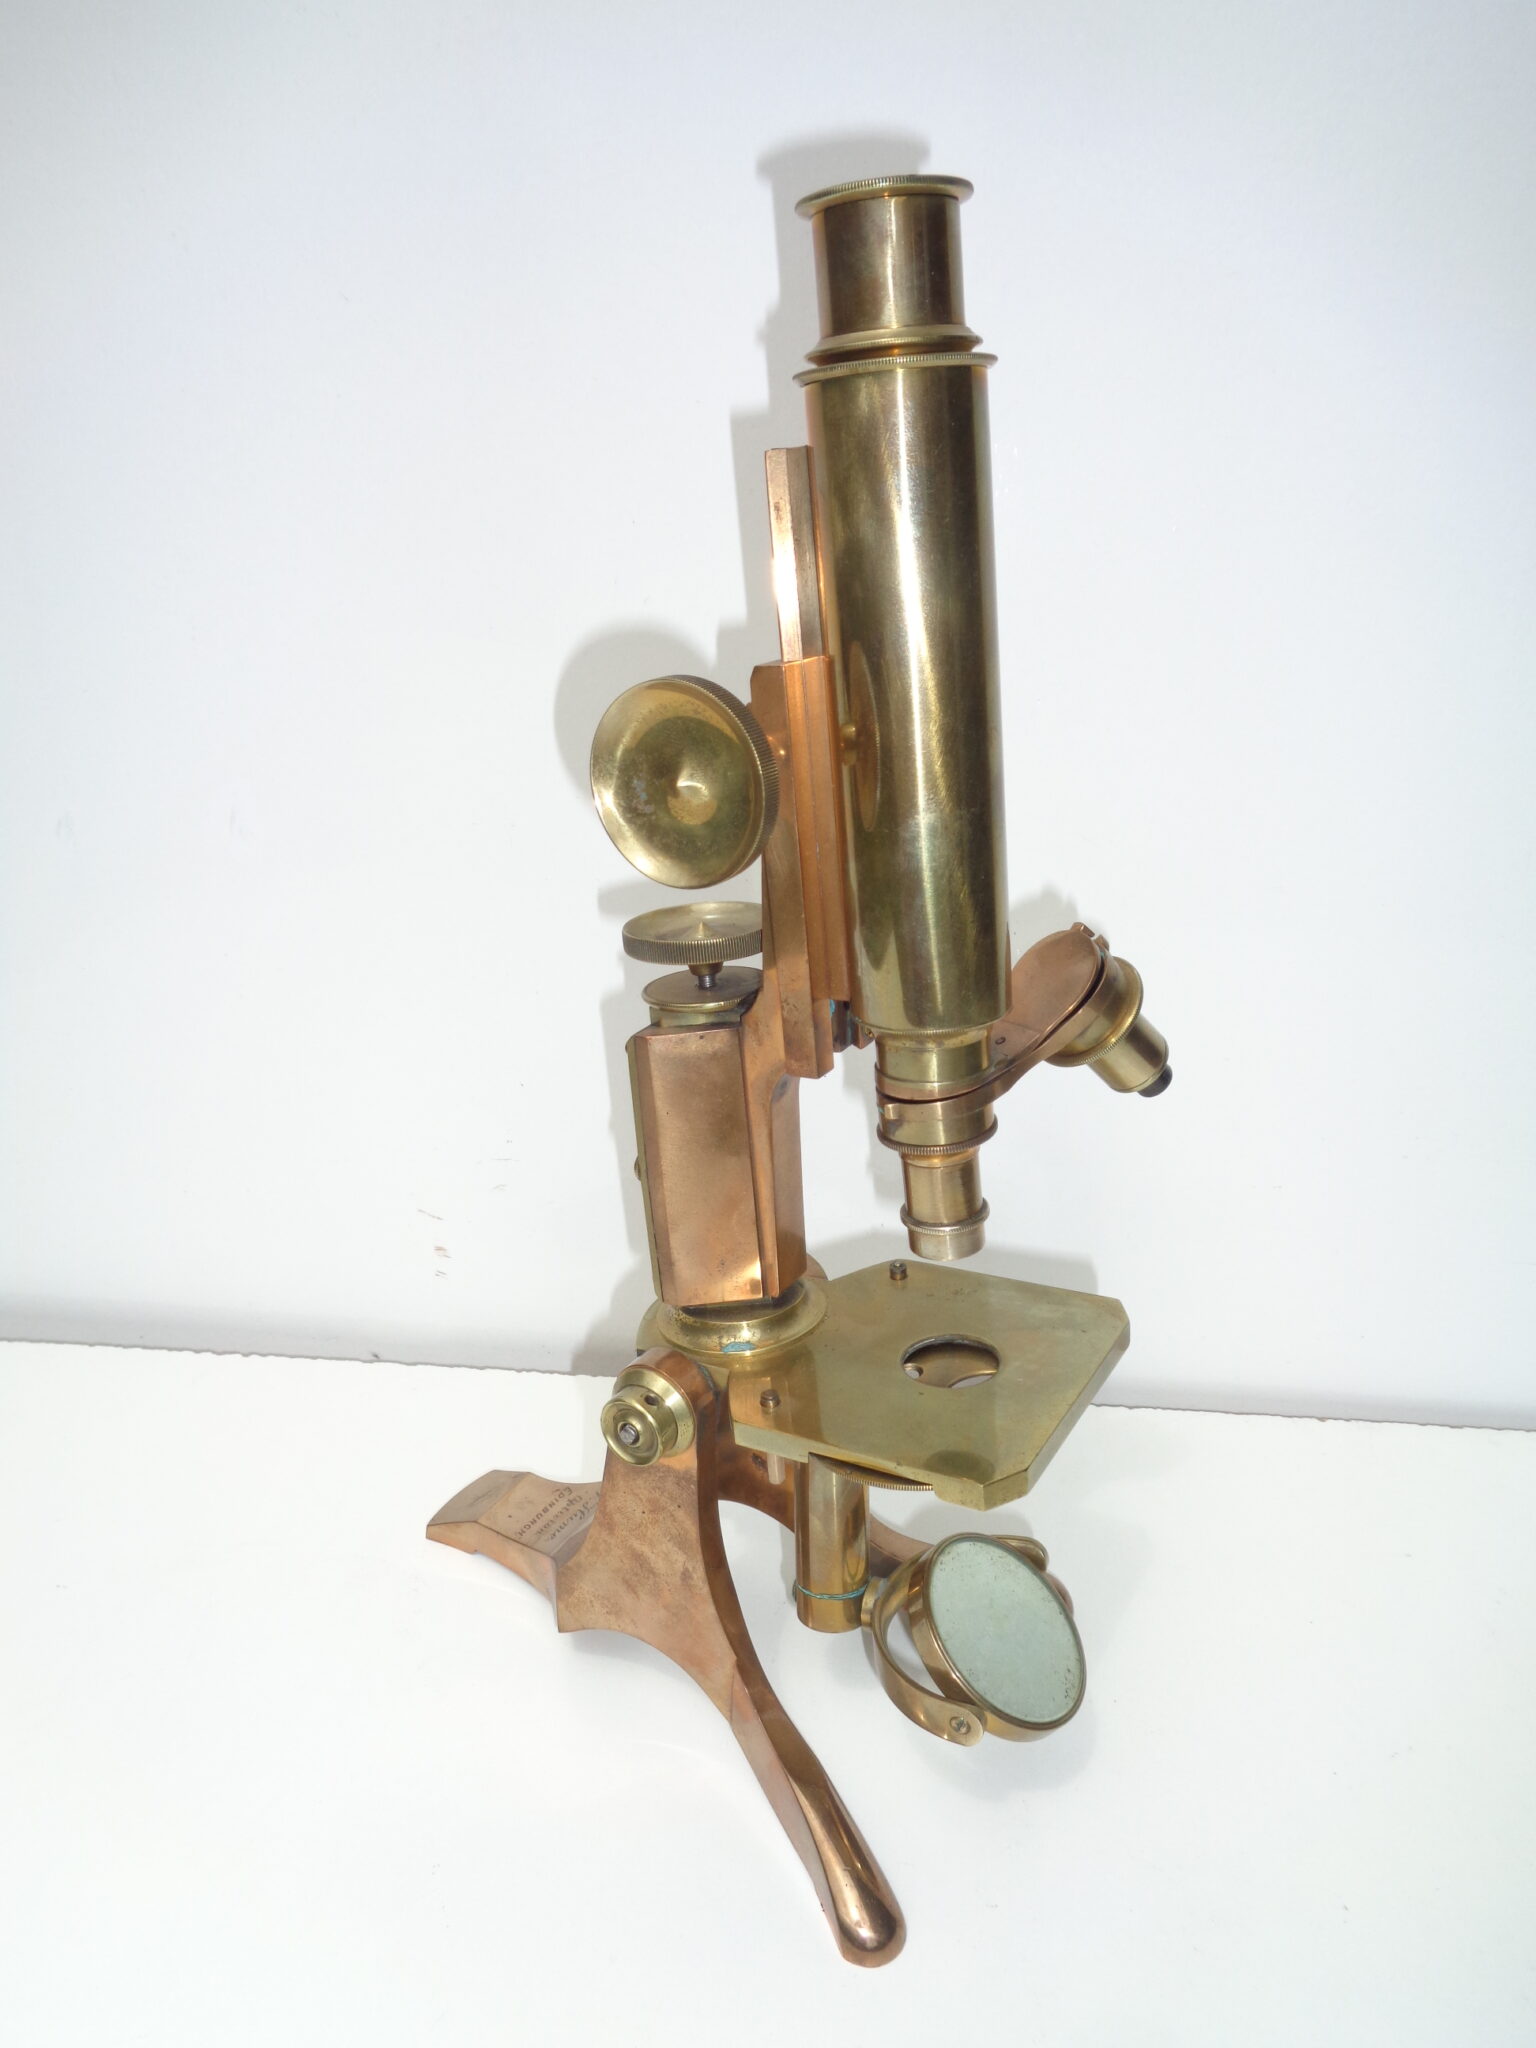 Microscope by W. Hume 1874-1921